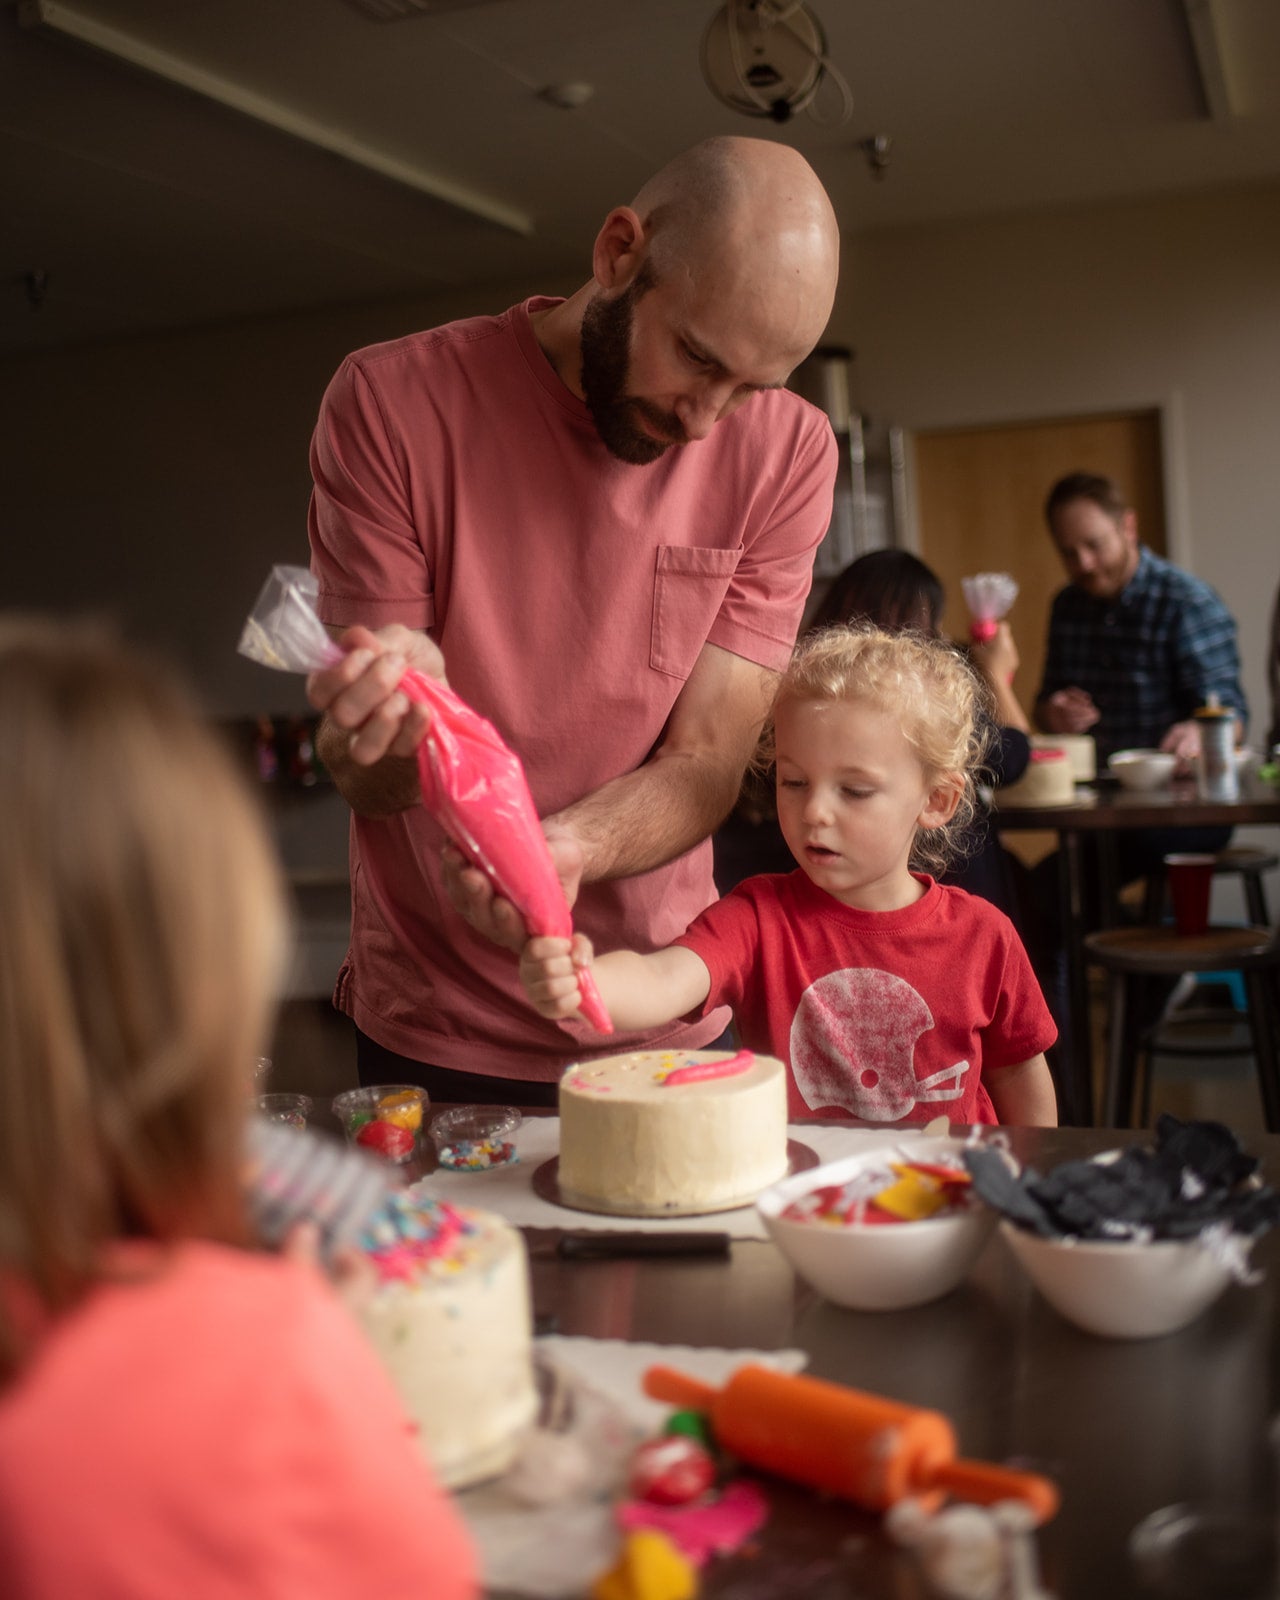 At a custom DIY cake decorating party in the Portland area, a father and son decorate a white cake with pink frosting from a piping bag. They are both concentrating and appear happy. Other groups of kids and parents are also decorating cakes. 